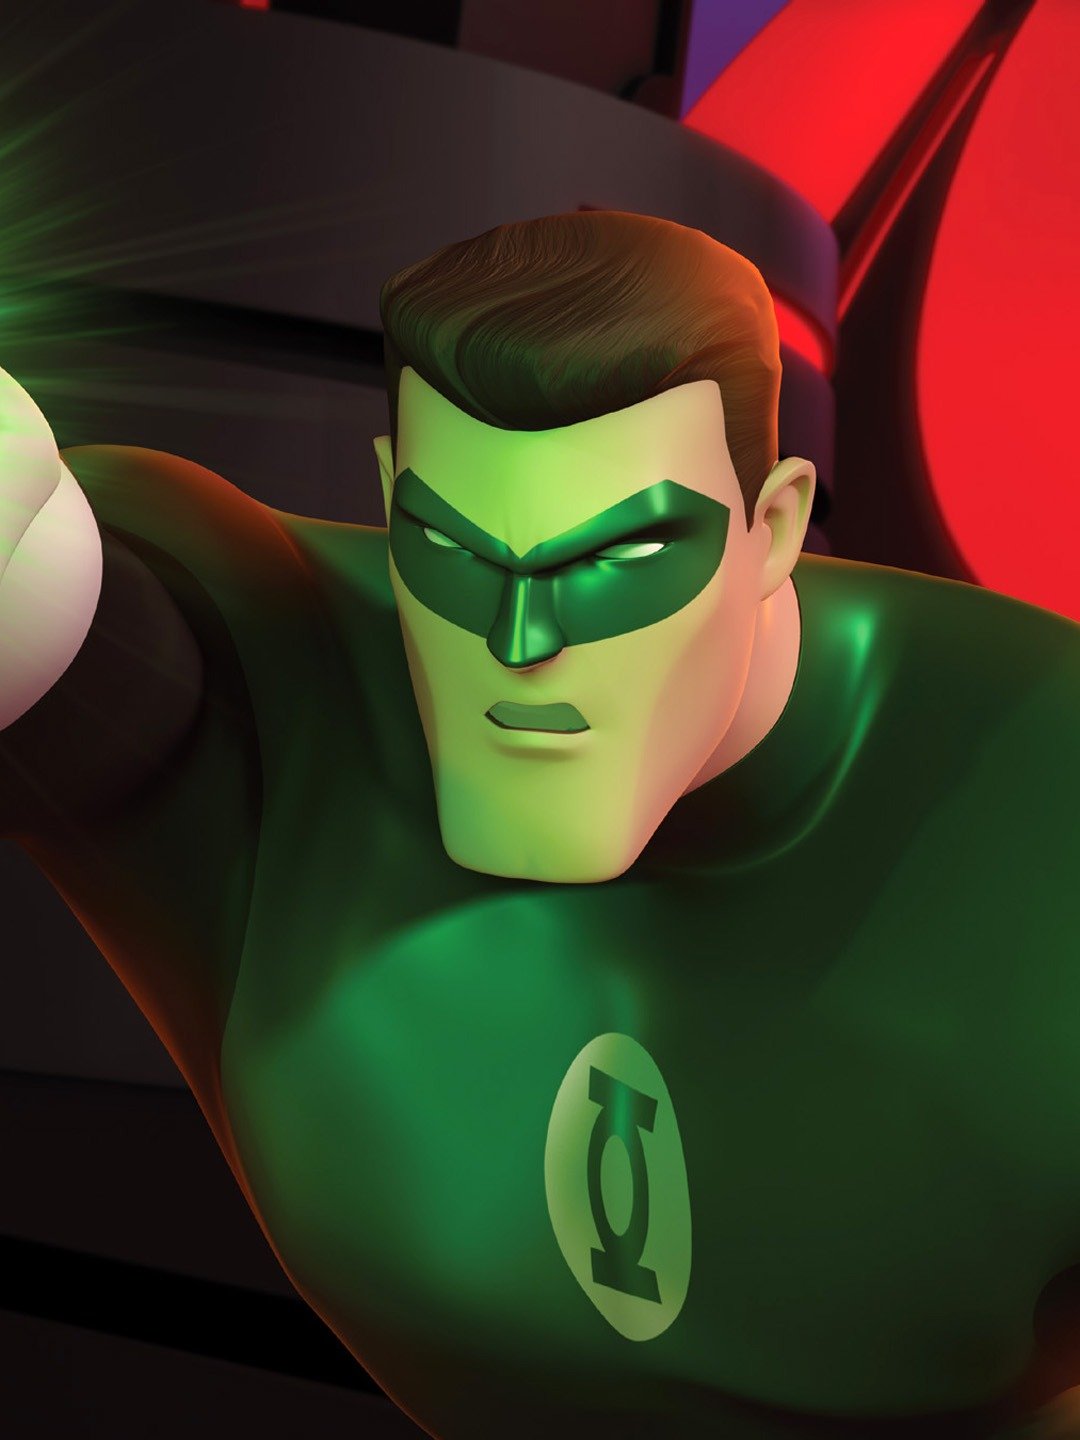 Green Lantern: The Animated Series - Rotten Tomatoes